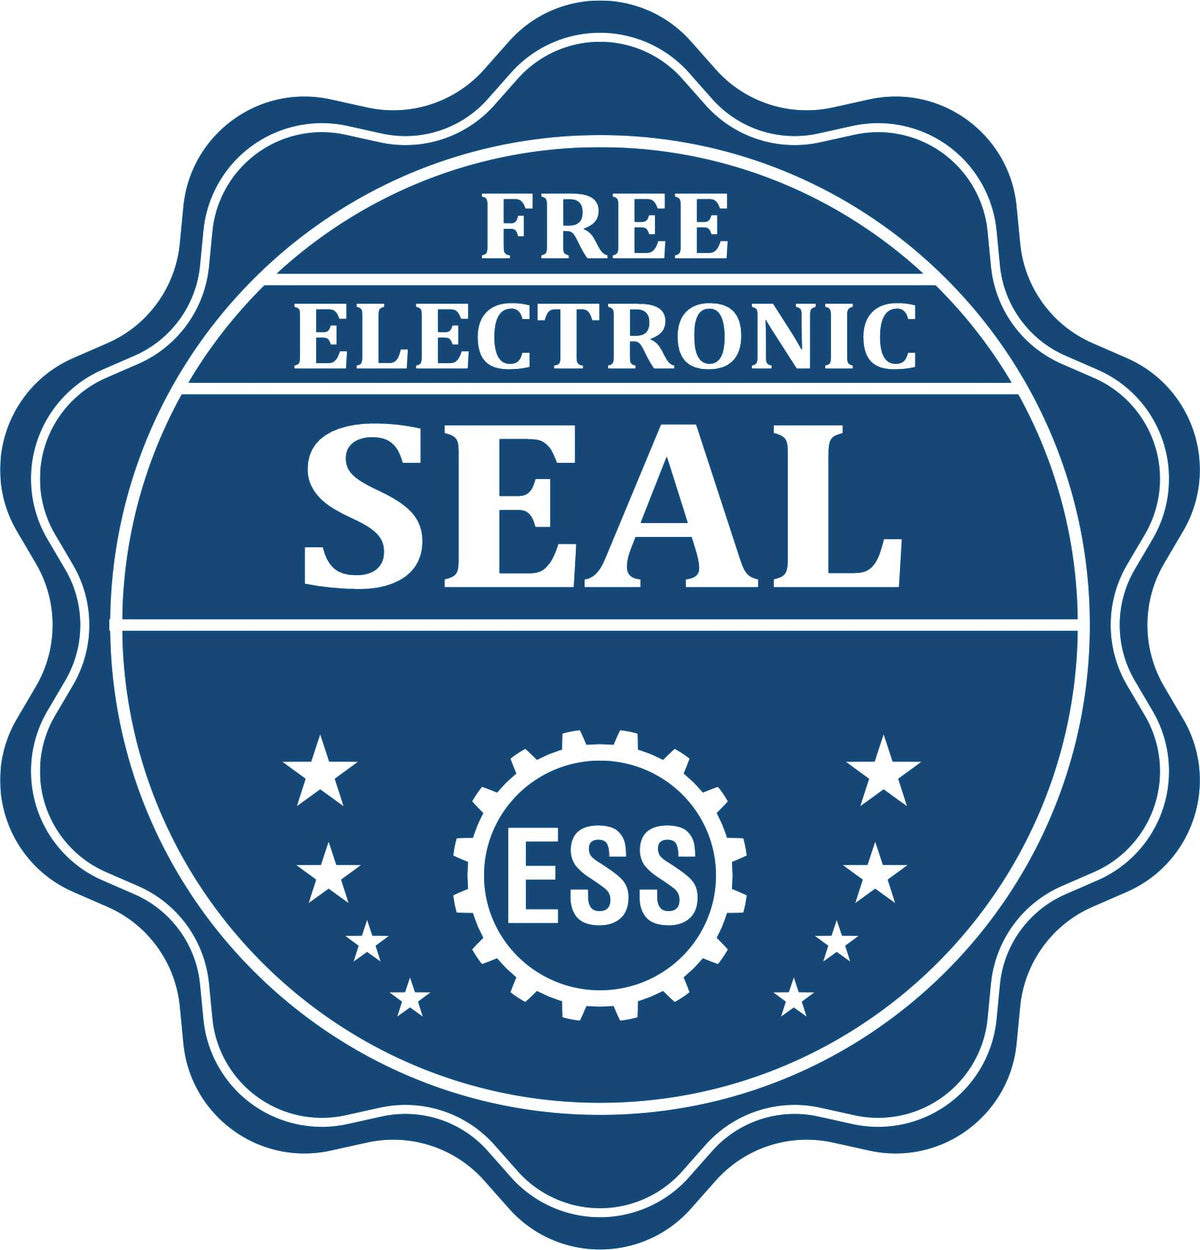 A badge showing a free electronic seal for the Hybrid Kentucky Land Surveyor Seal with stars and the ESS gear on the emblem.